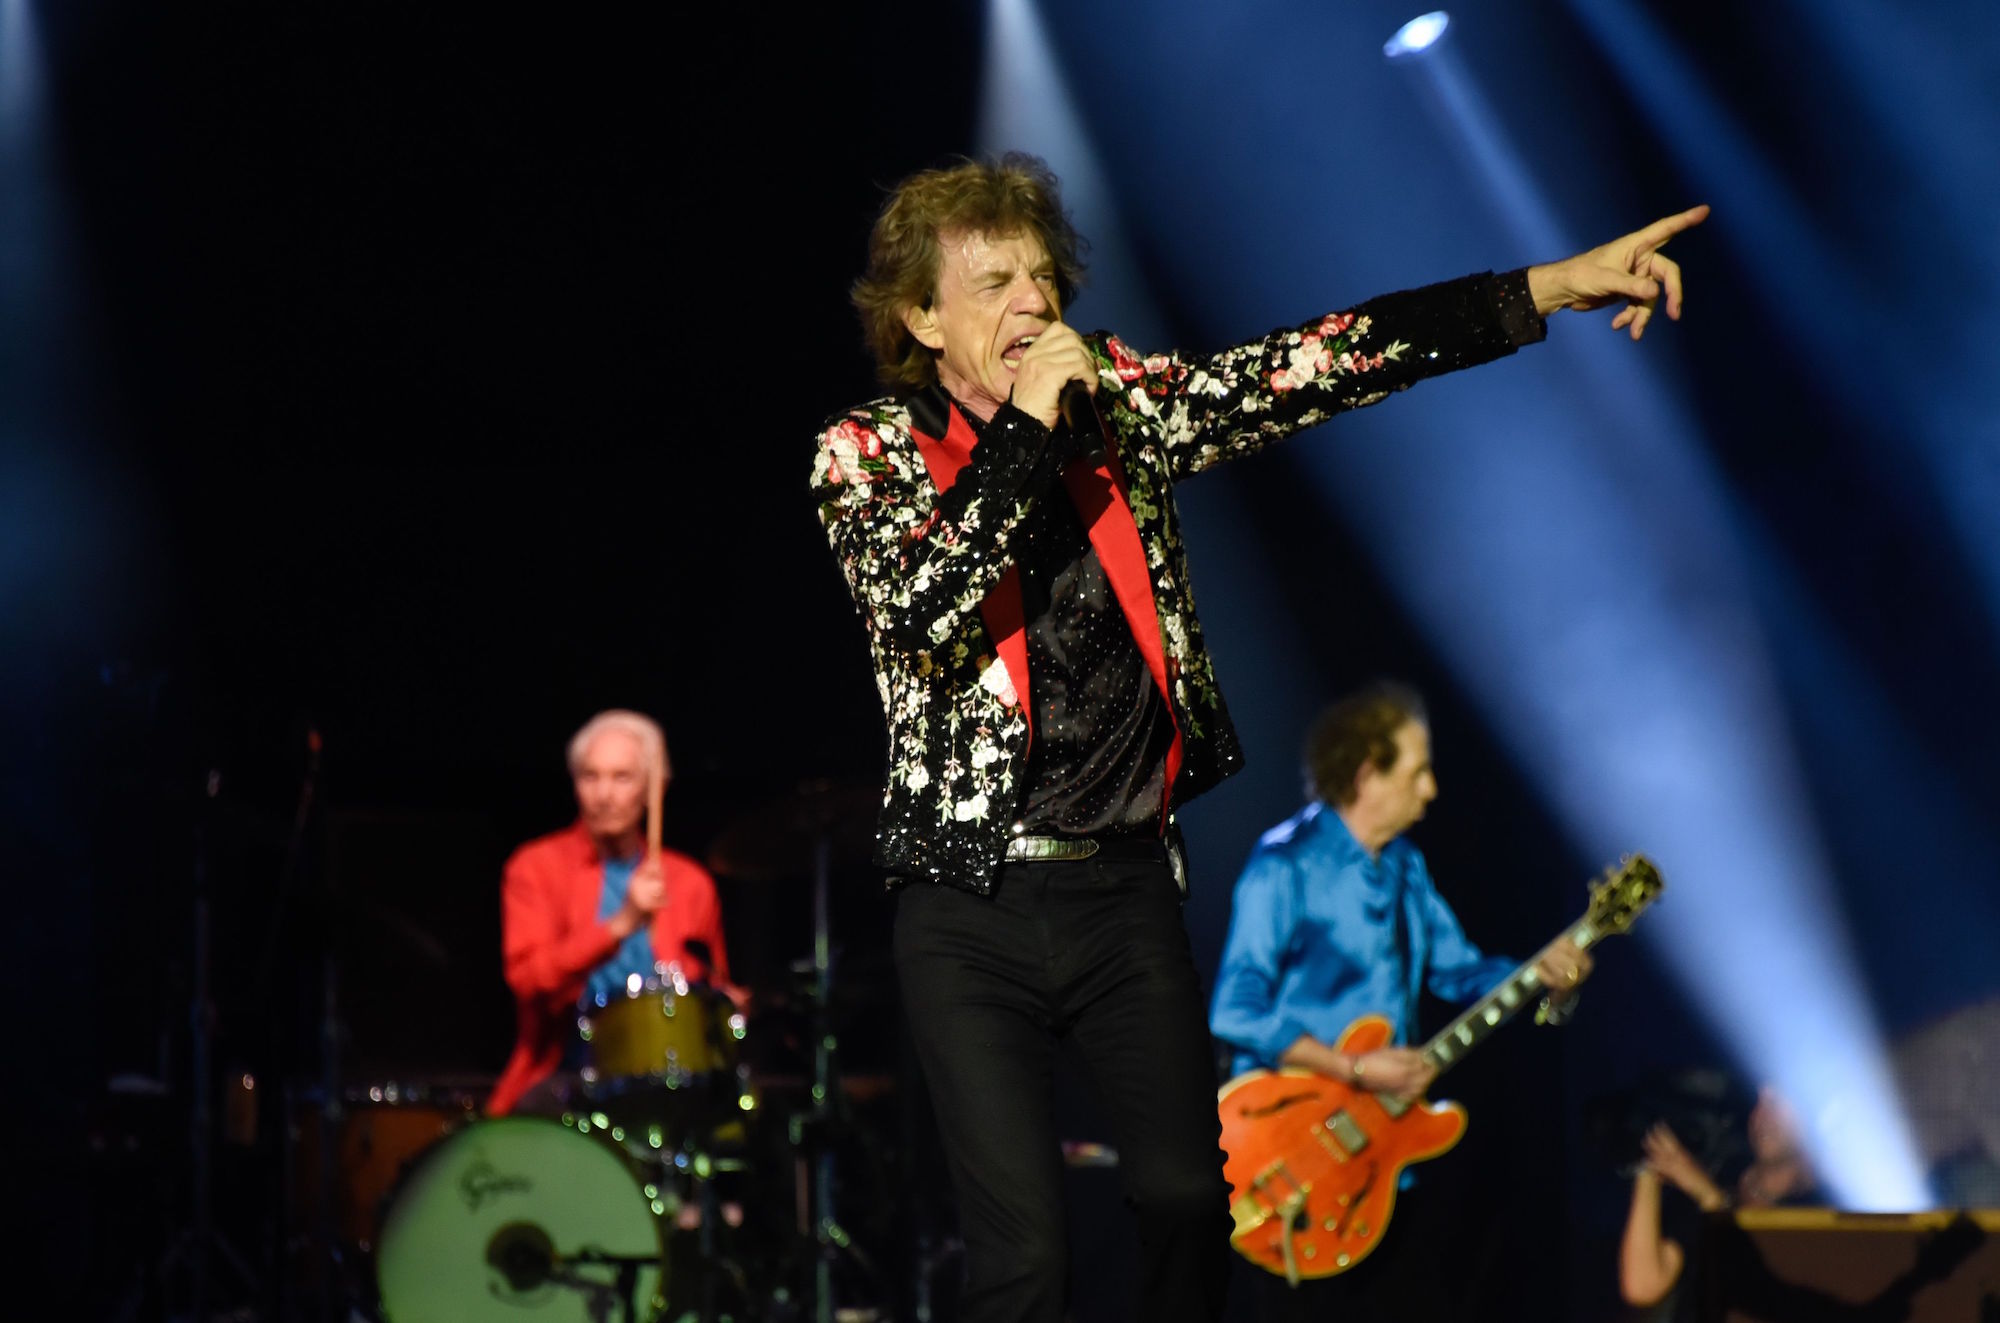 Charlie Watts, Mick Jagger and Keith Richards of The Rolling Stones perform onstage